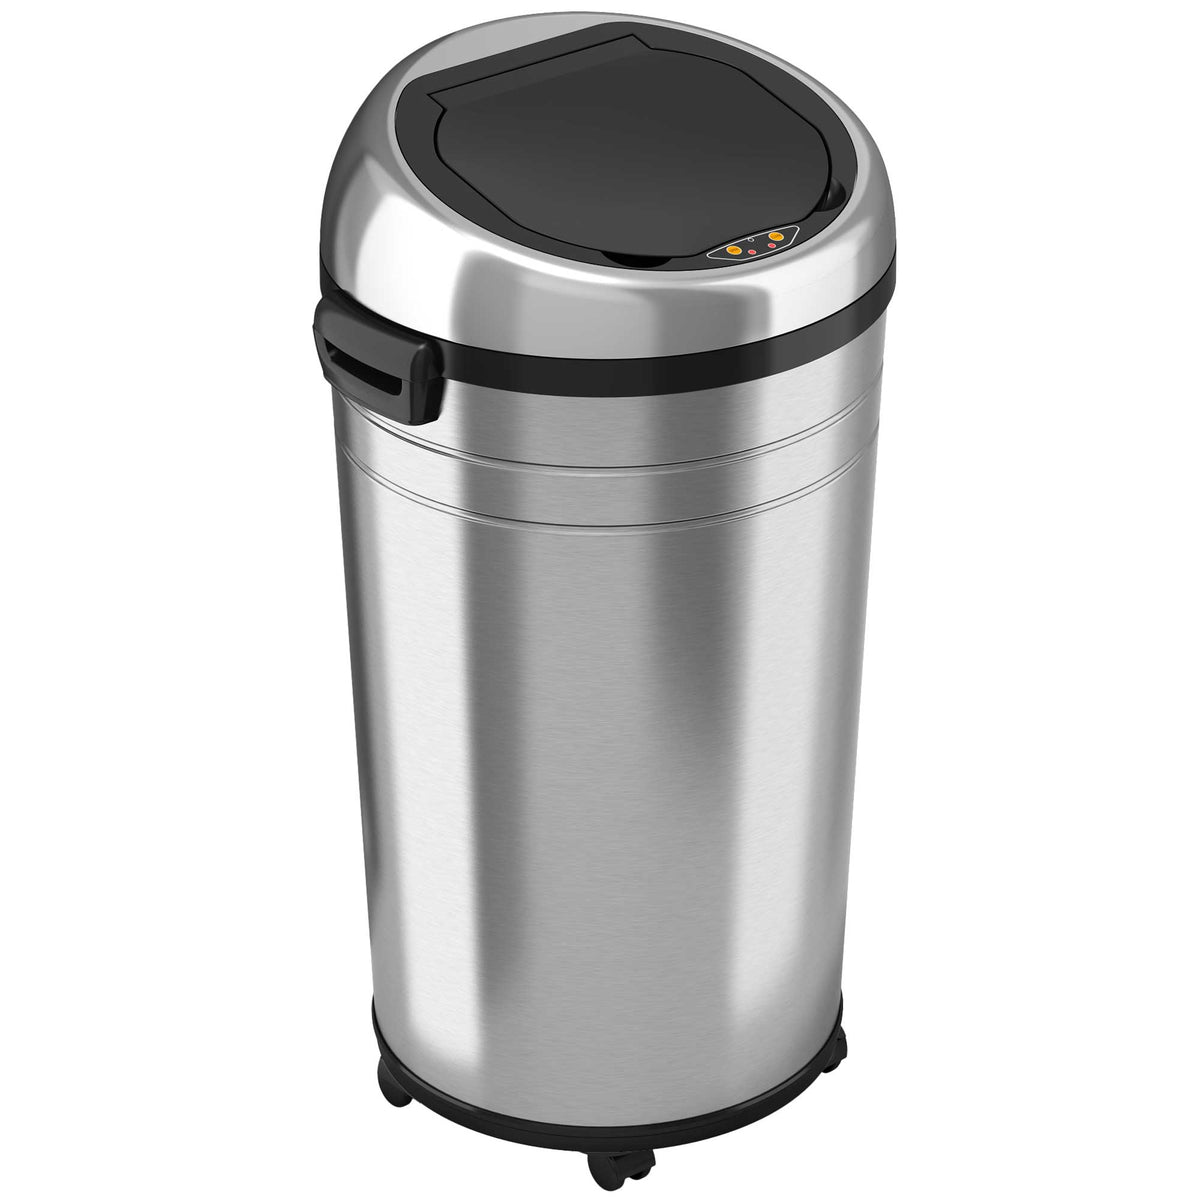 iTouchess 23 Gallon Sensor Trash Can with Wheels